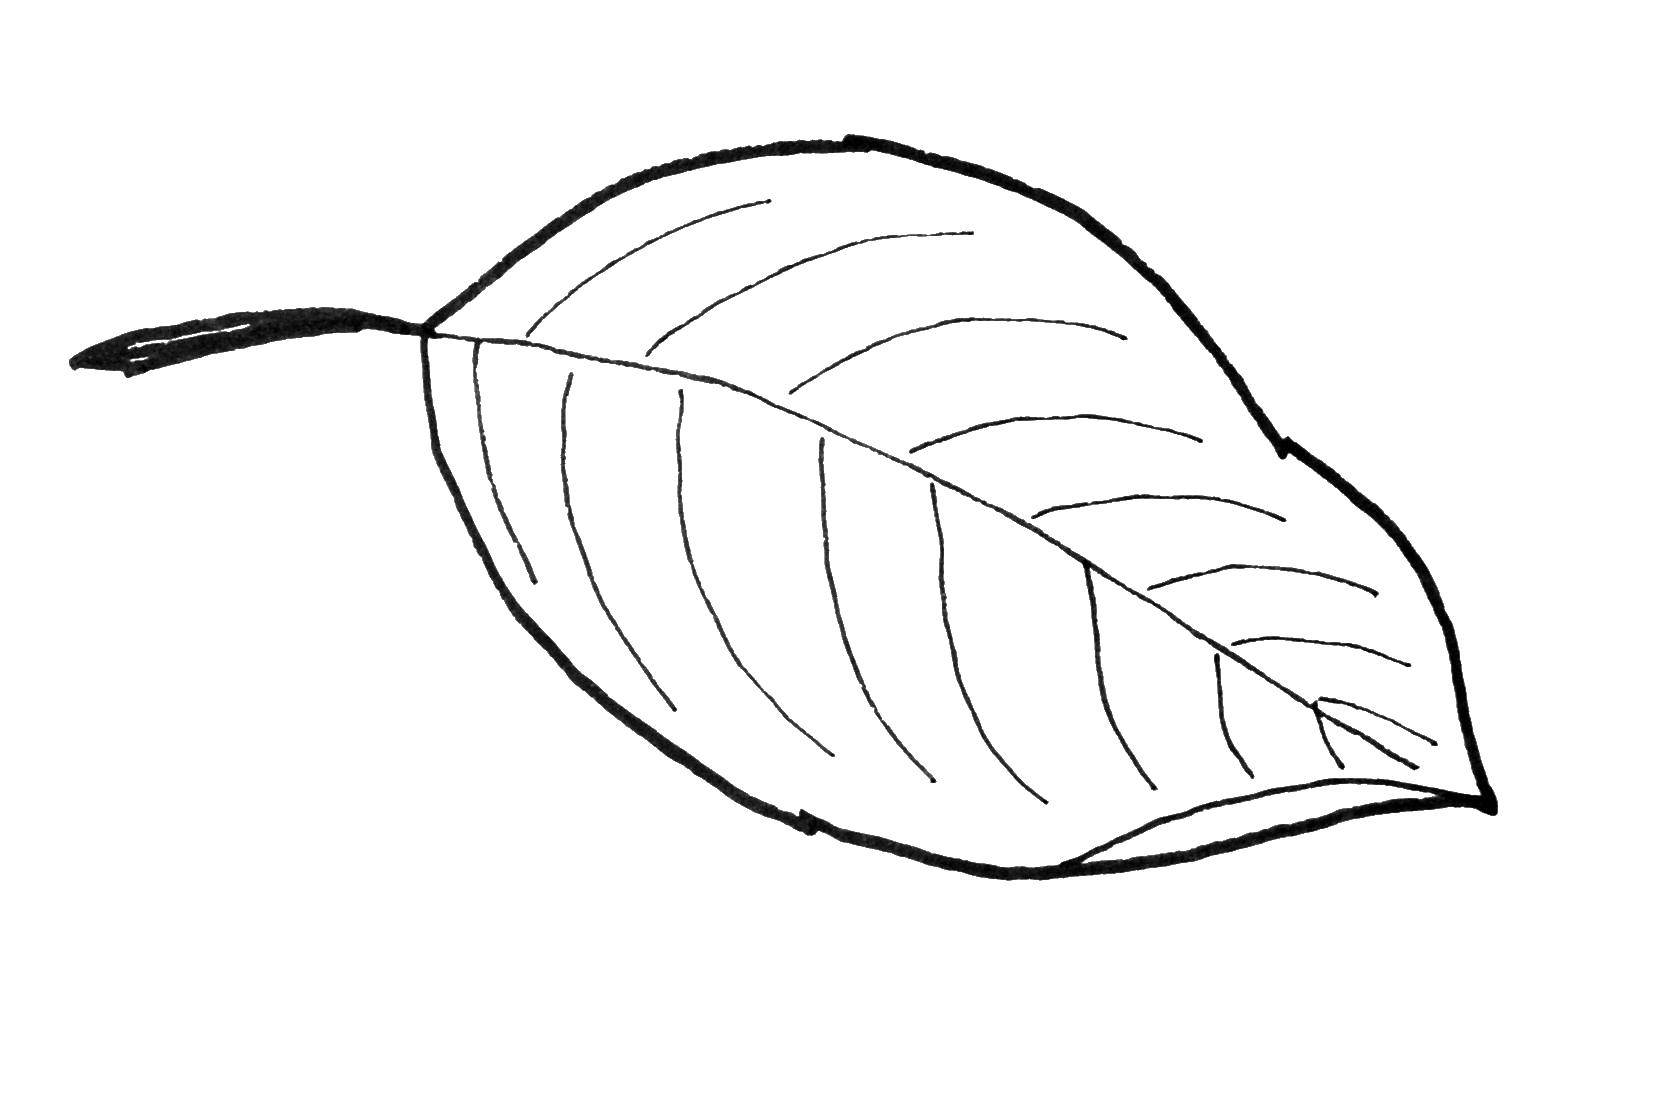 Coloring A piece of wood. Category The contours of the leaves of the trees. Tags:  leaf, leaves.